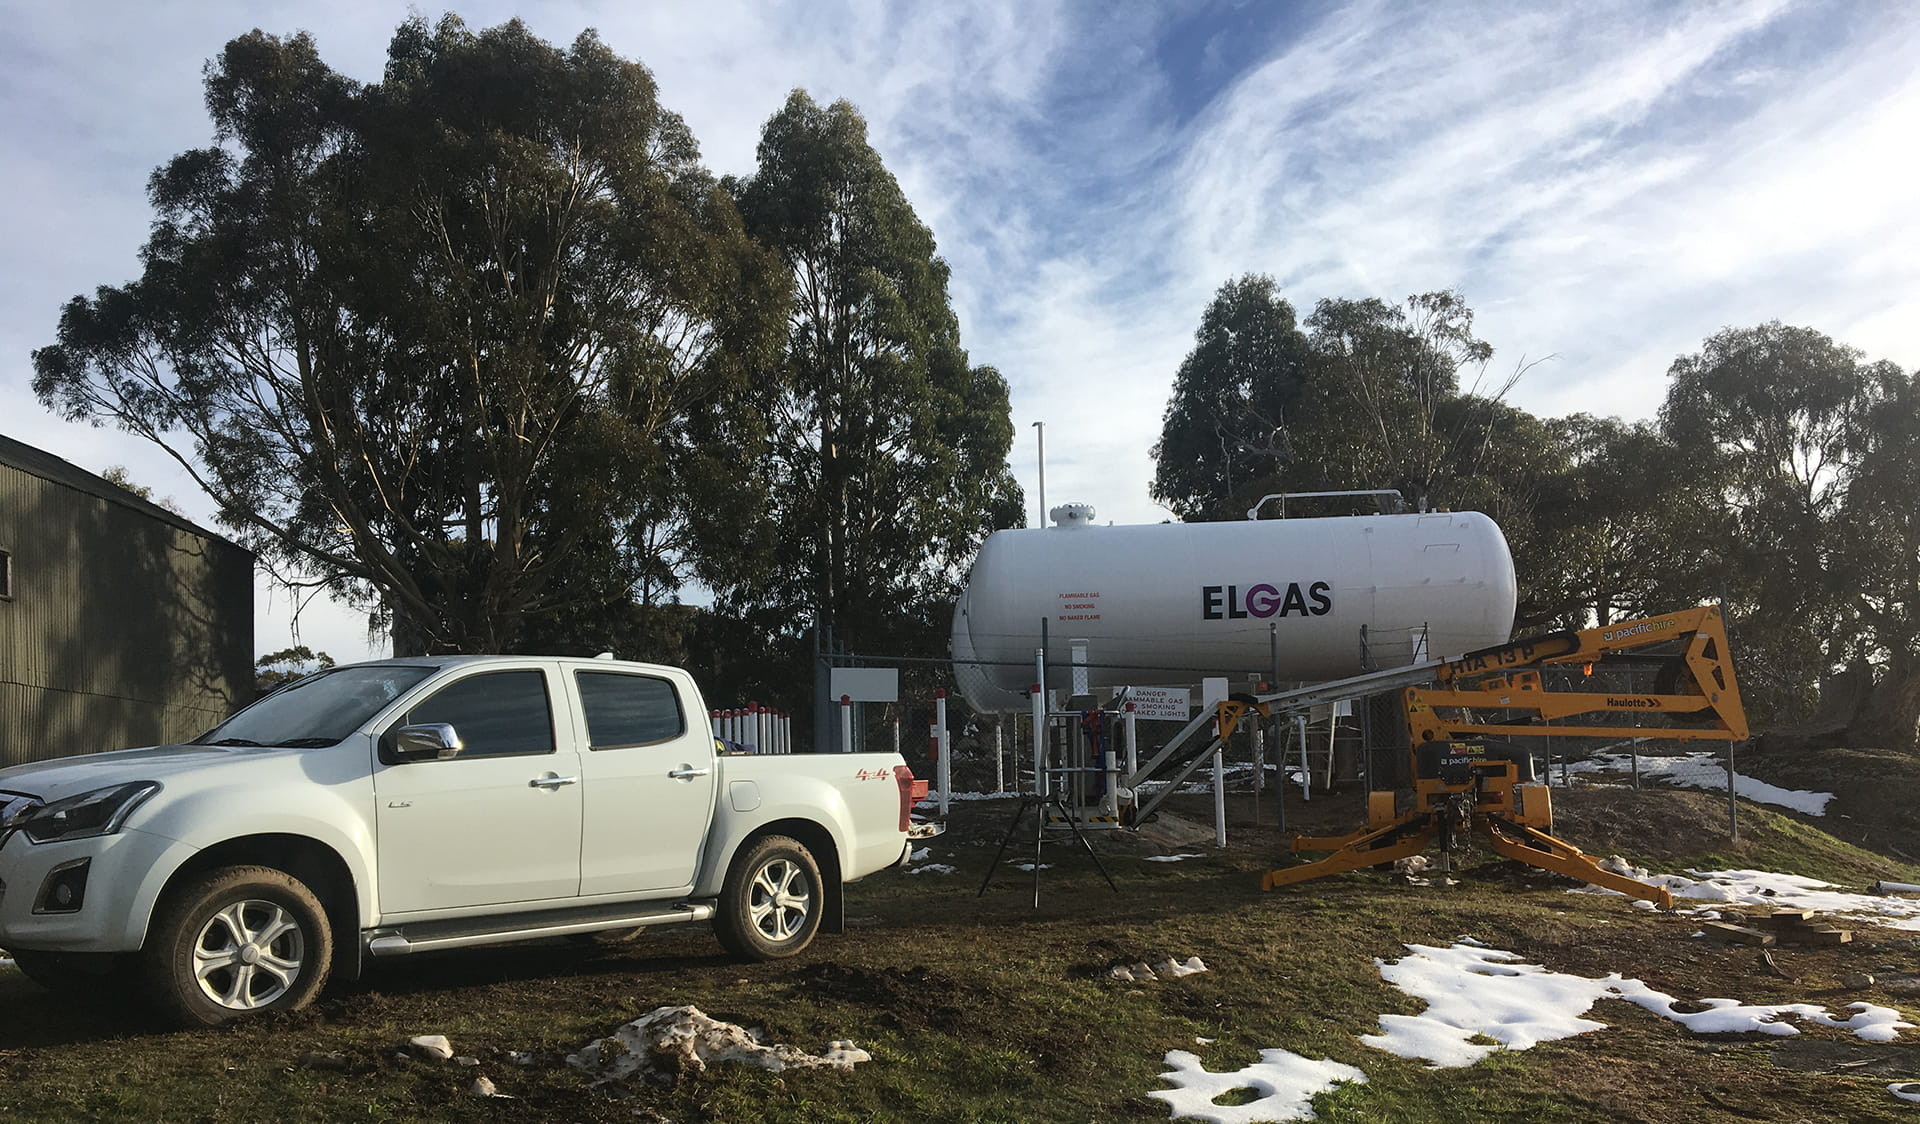 Maintenance works at Mount Buffalo Chalet - Elgas refurbishment of large bullets to provide gas heating for the building, 6 May 2020.